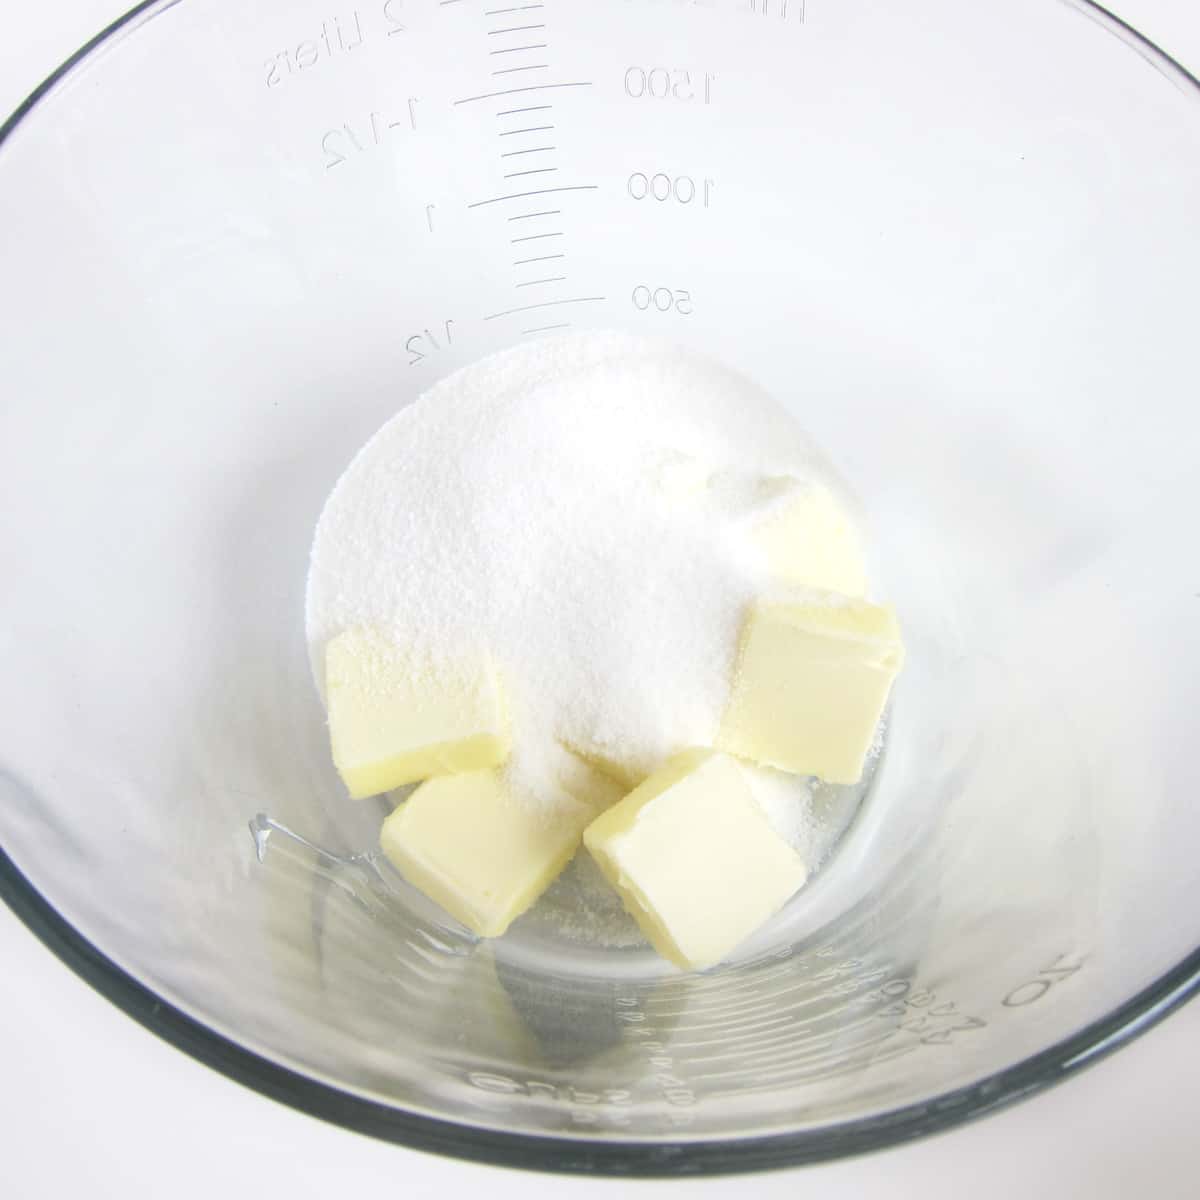 Slices of butter and granulated sugar in a mixing bowl.